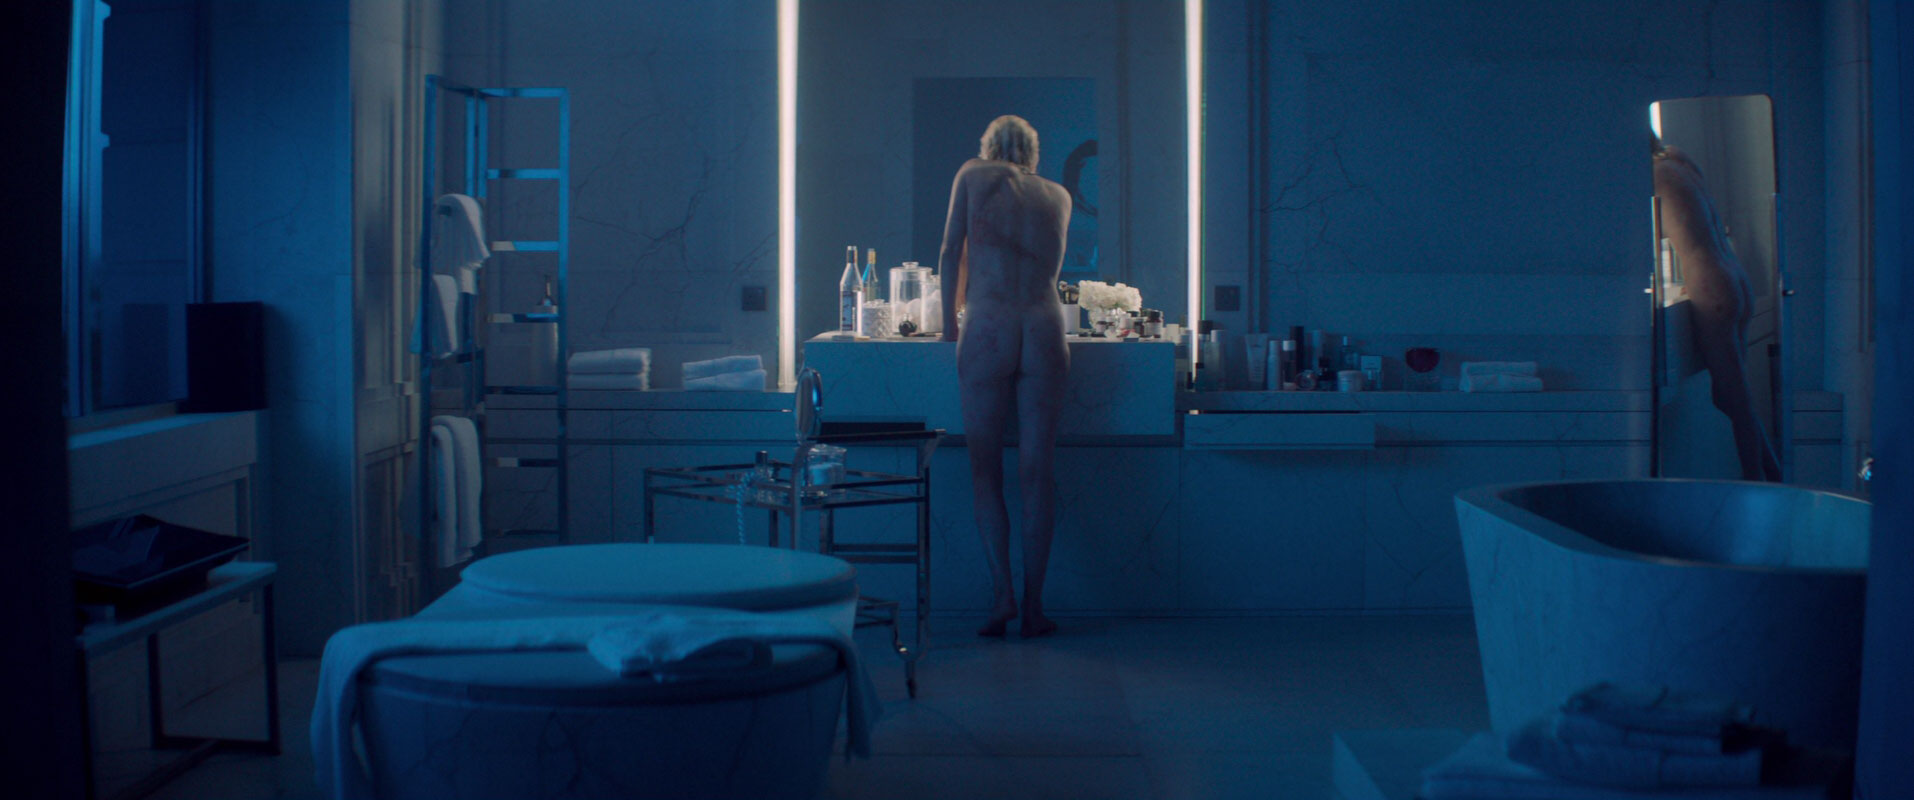 Charlize theron atomic blonde nude